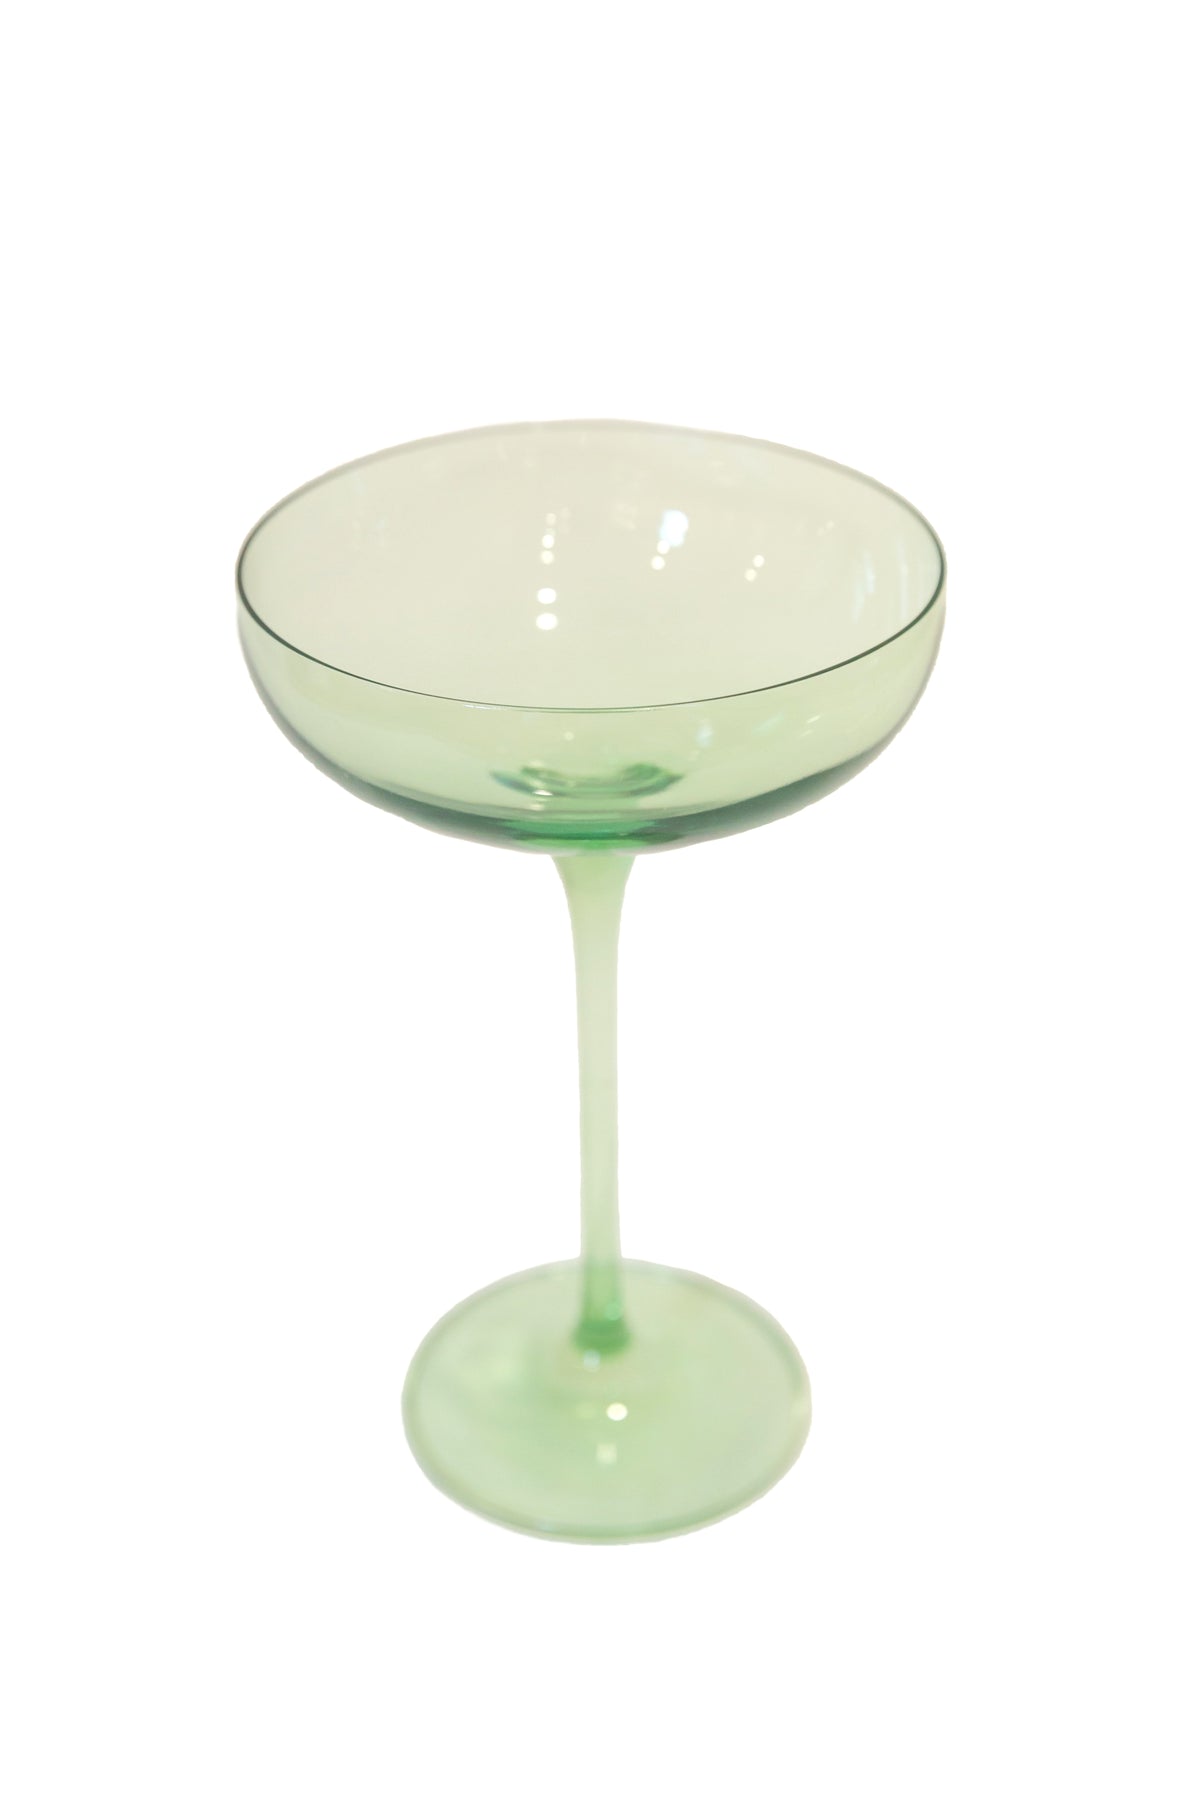 Champagne Coupe Stemware, Set of 6 Mint Green